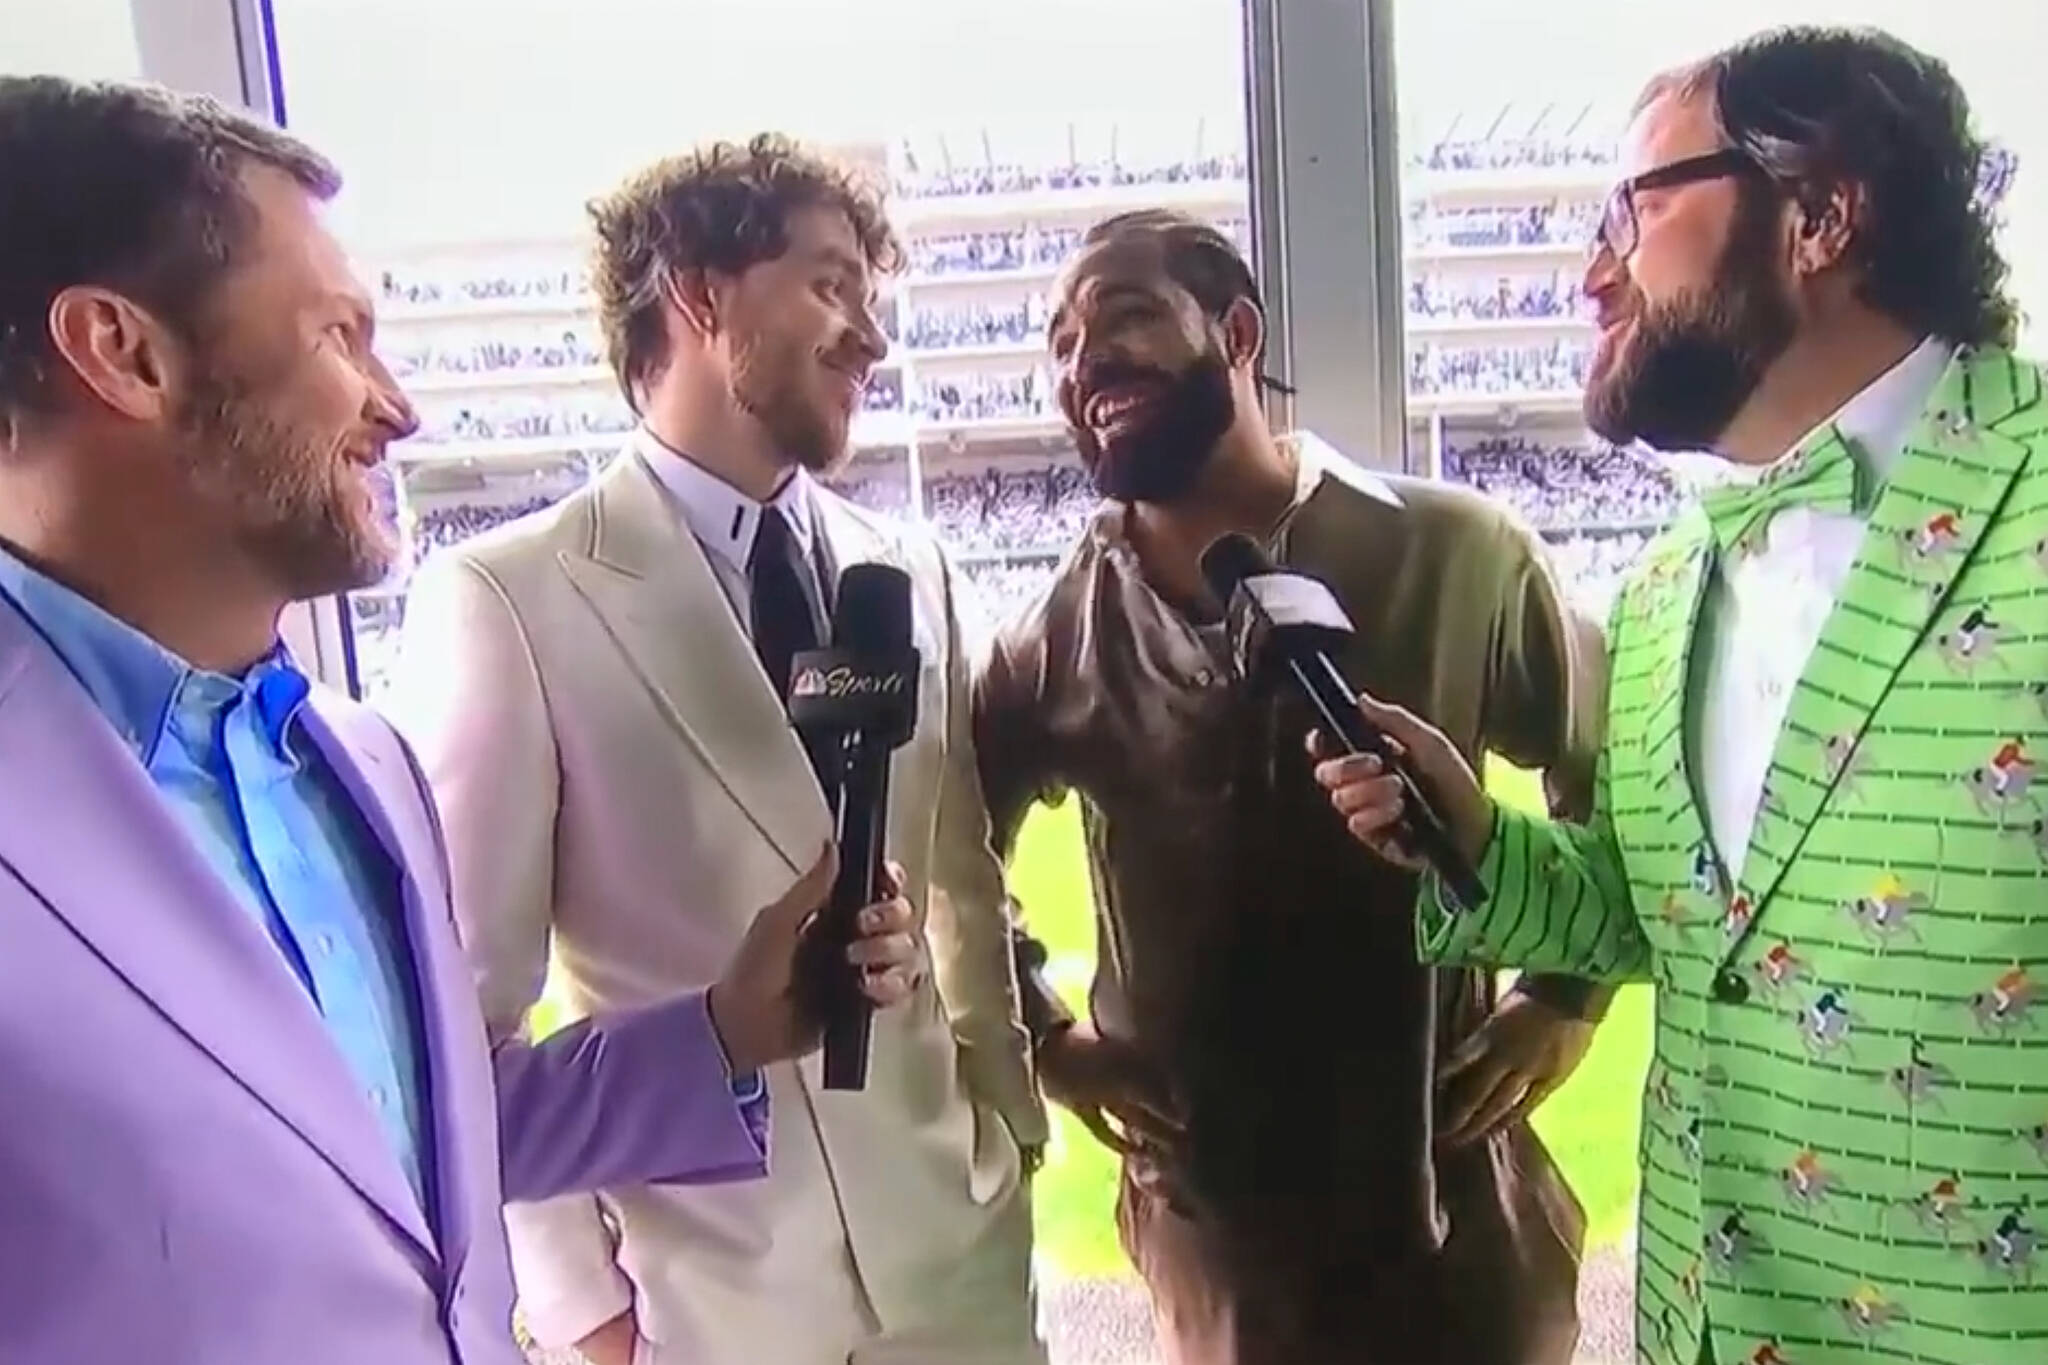 Drake got drunk at the Kentucky Derby and his interviews were hilarious